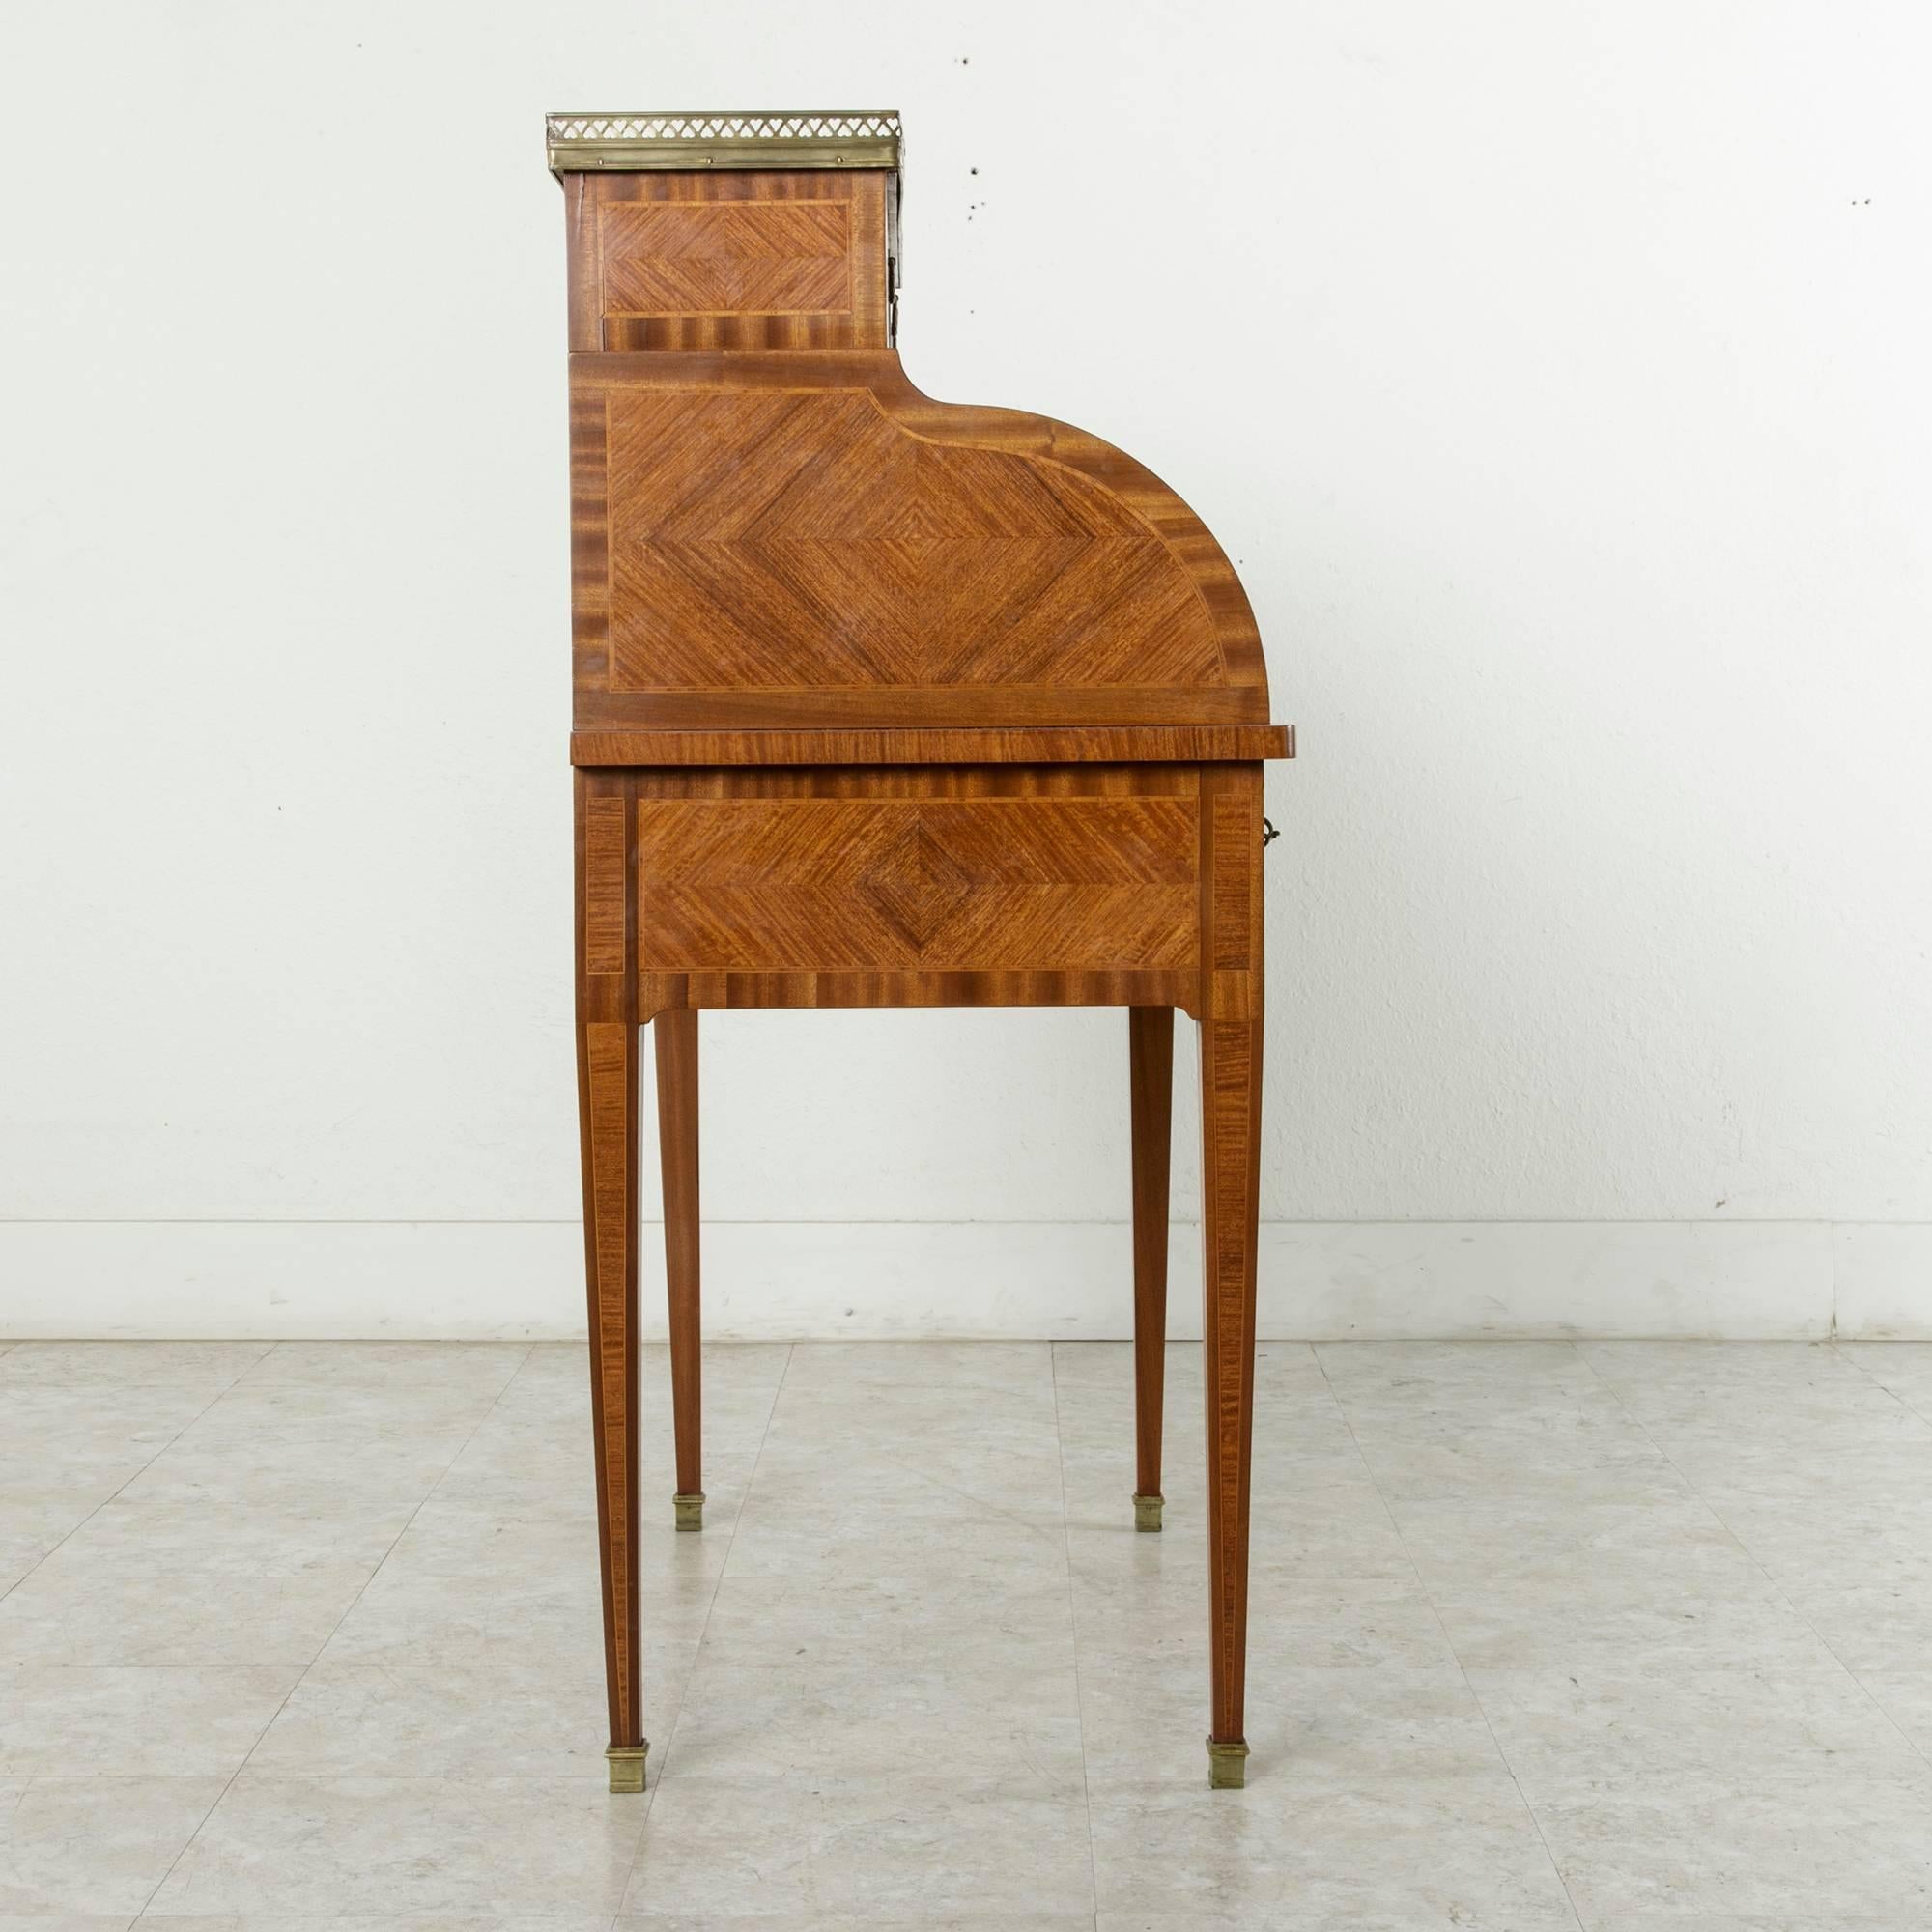 19th Century Louis XVI Marquetry Cylinder Desk With Inlaid Musical Instruments 4